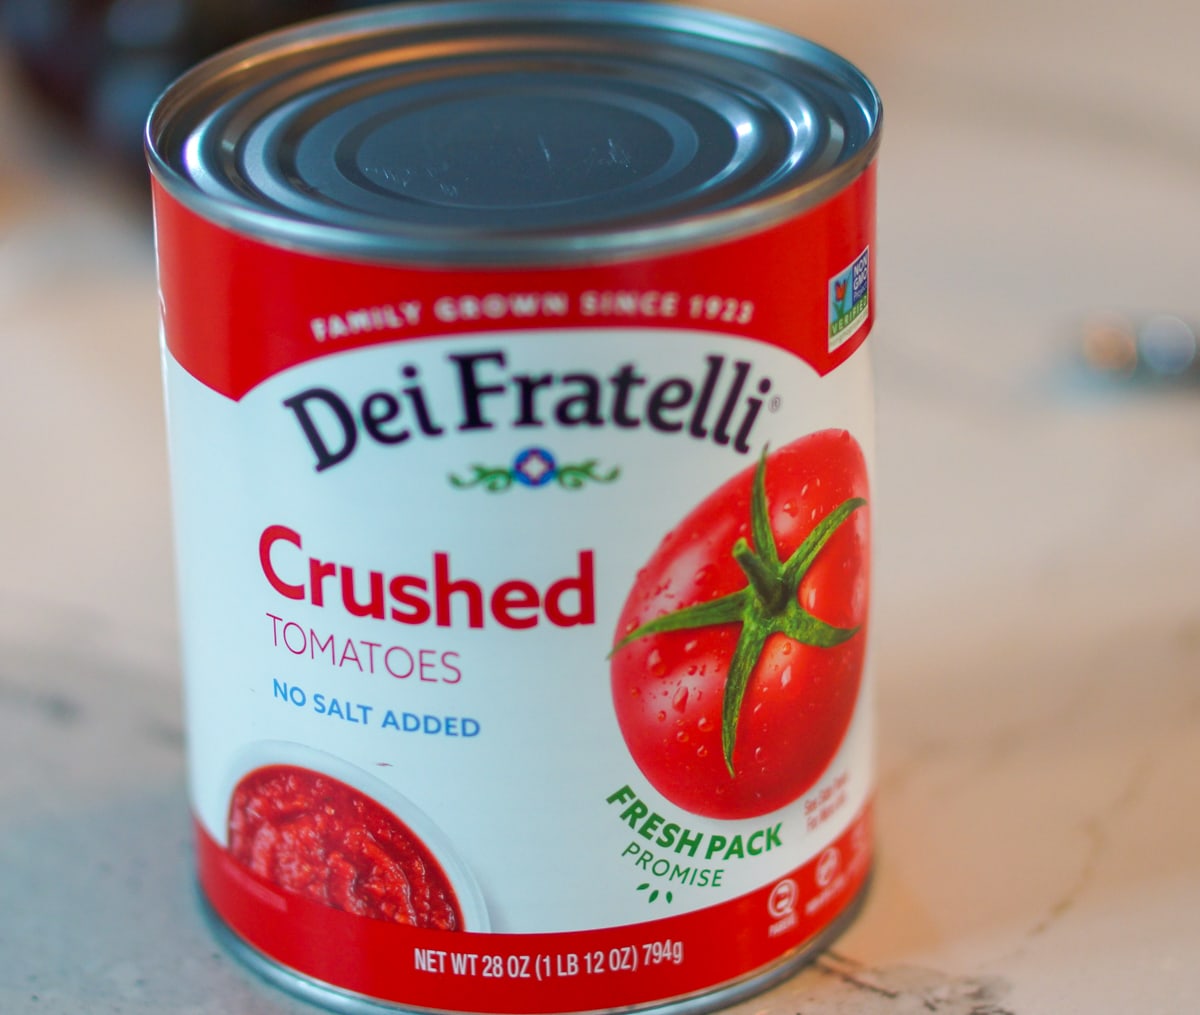 Can of Italian crushed tomatoes.